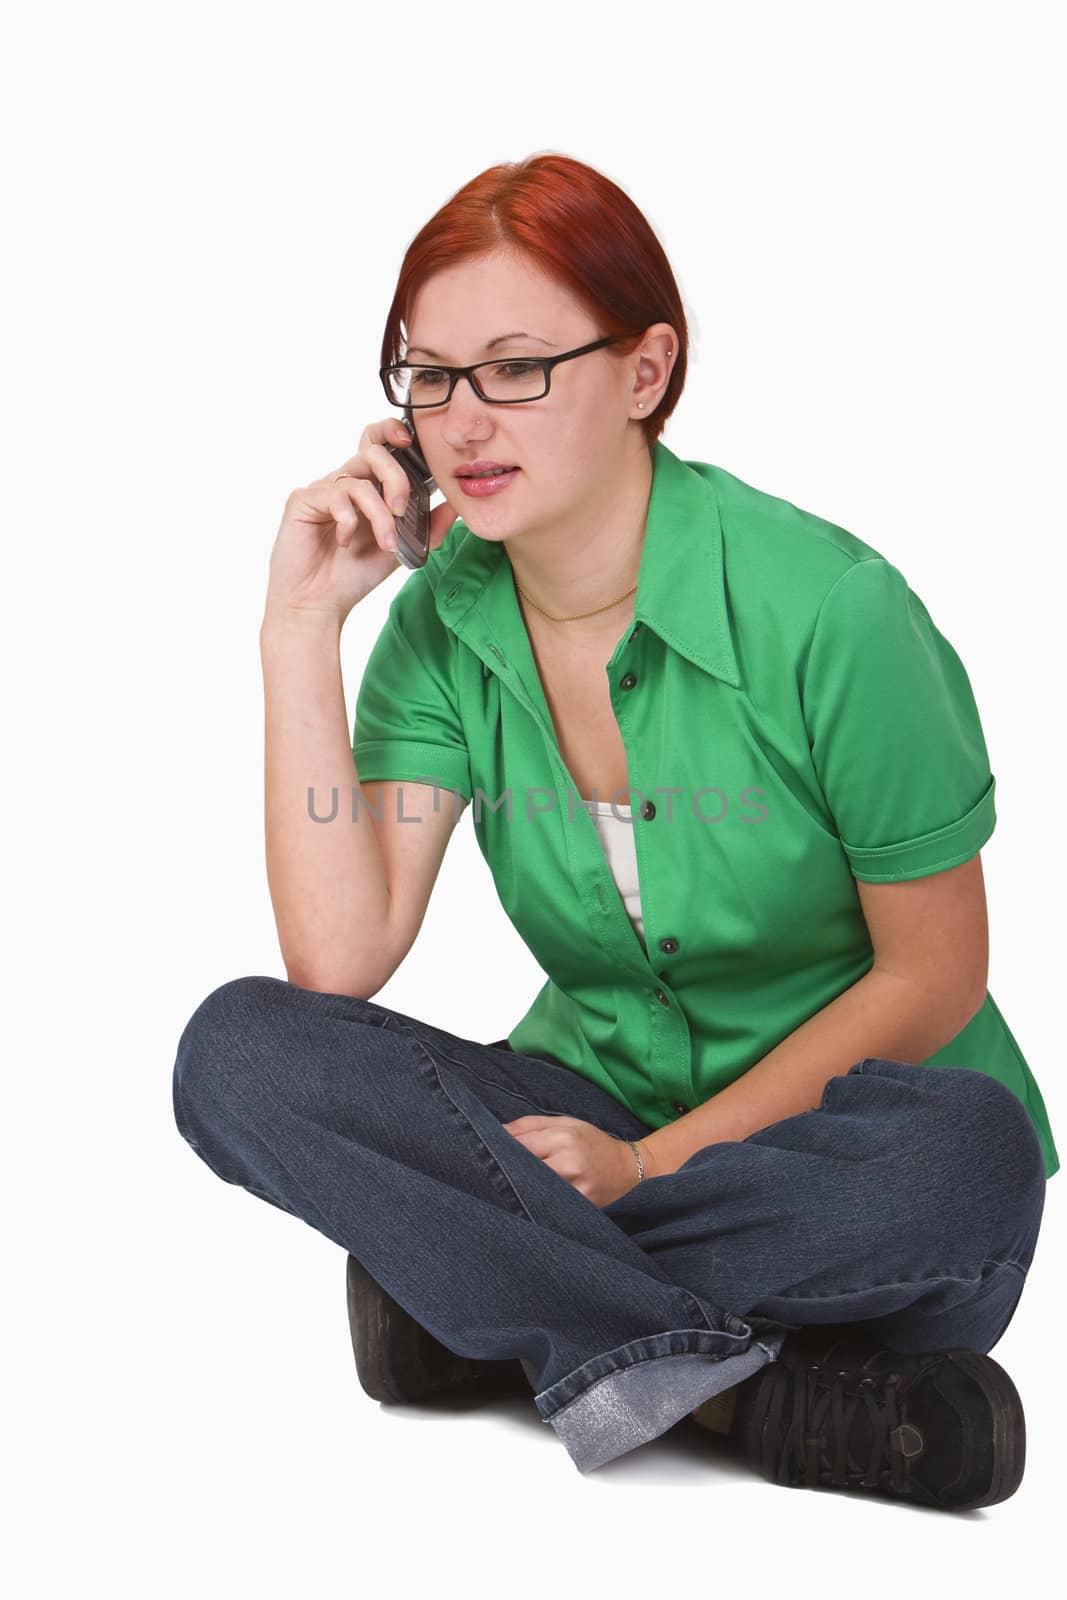 Image of a redheaded teenager girl using a mobile phone.Shot with Canon 70-200mm f/2.8L IS USM